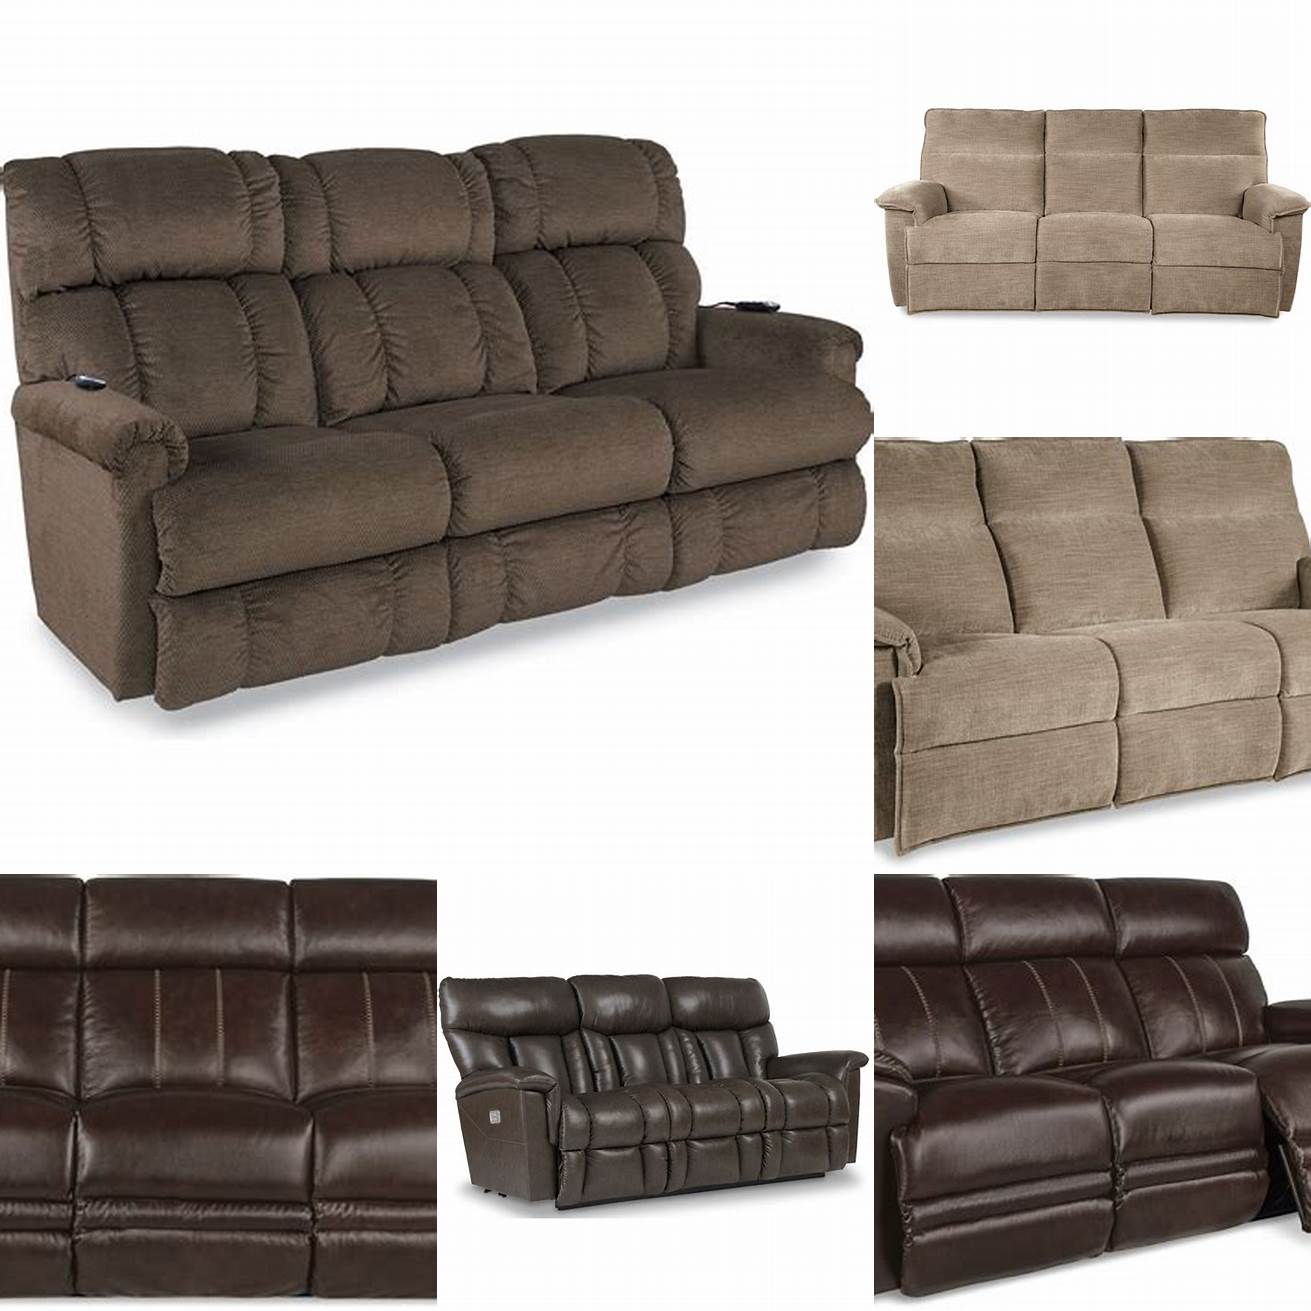 The Lazy Boy Reclining Sofa with adjustable headrests